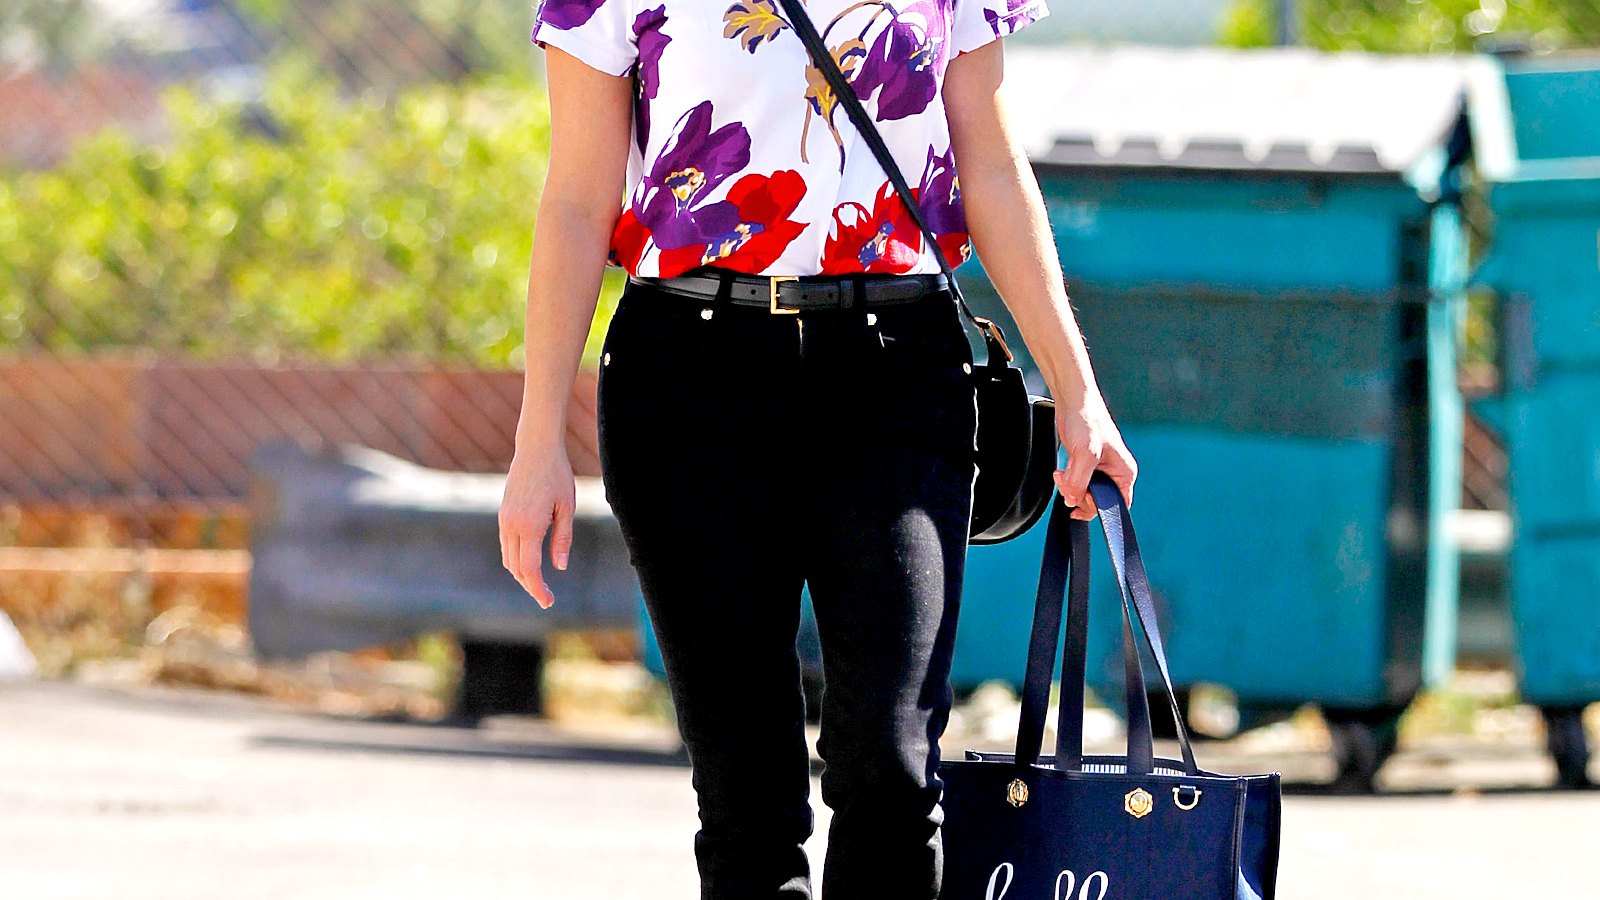 Reese Witherspoon wears Draper James on October 08, 2015 in L.A.